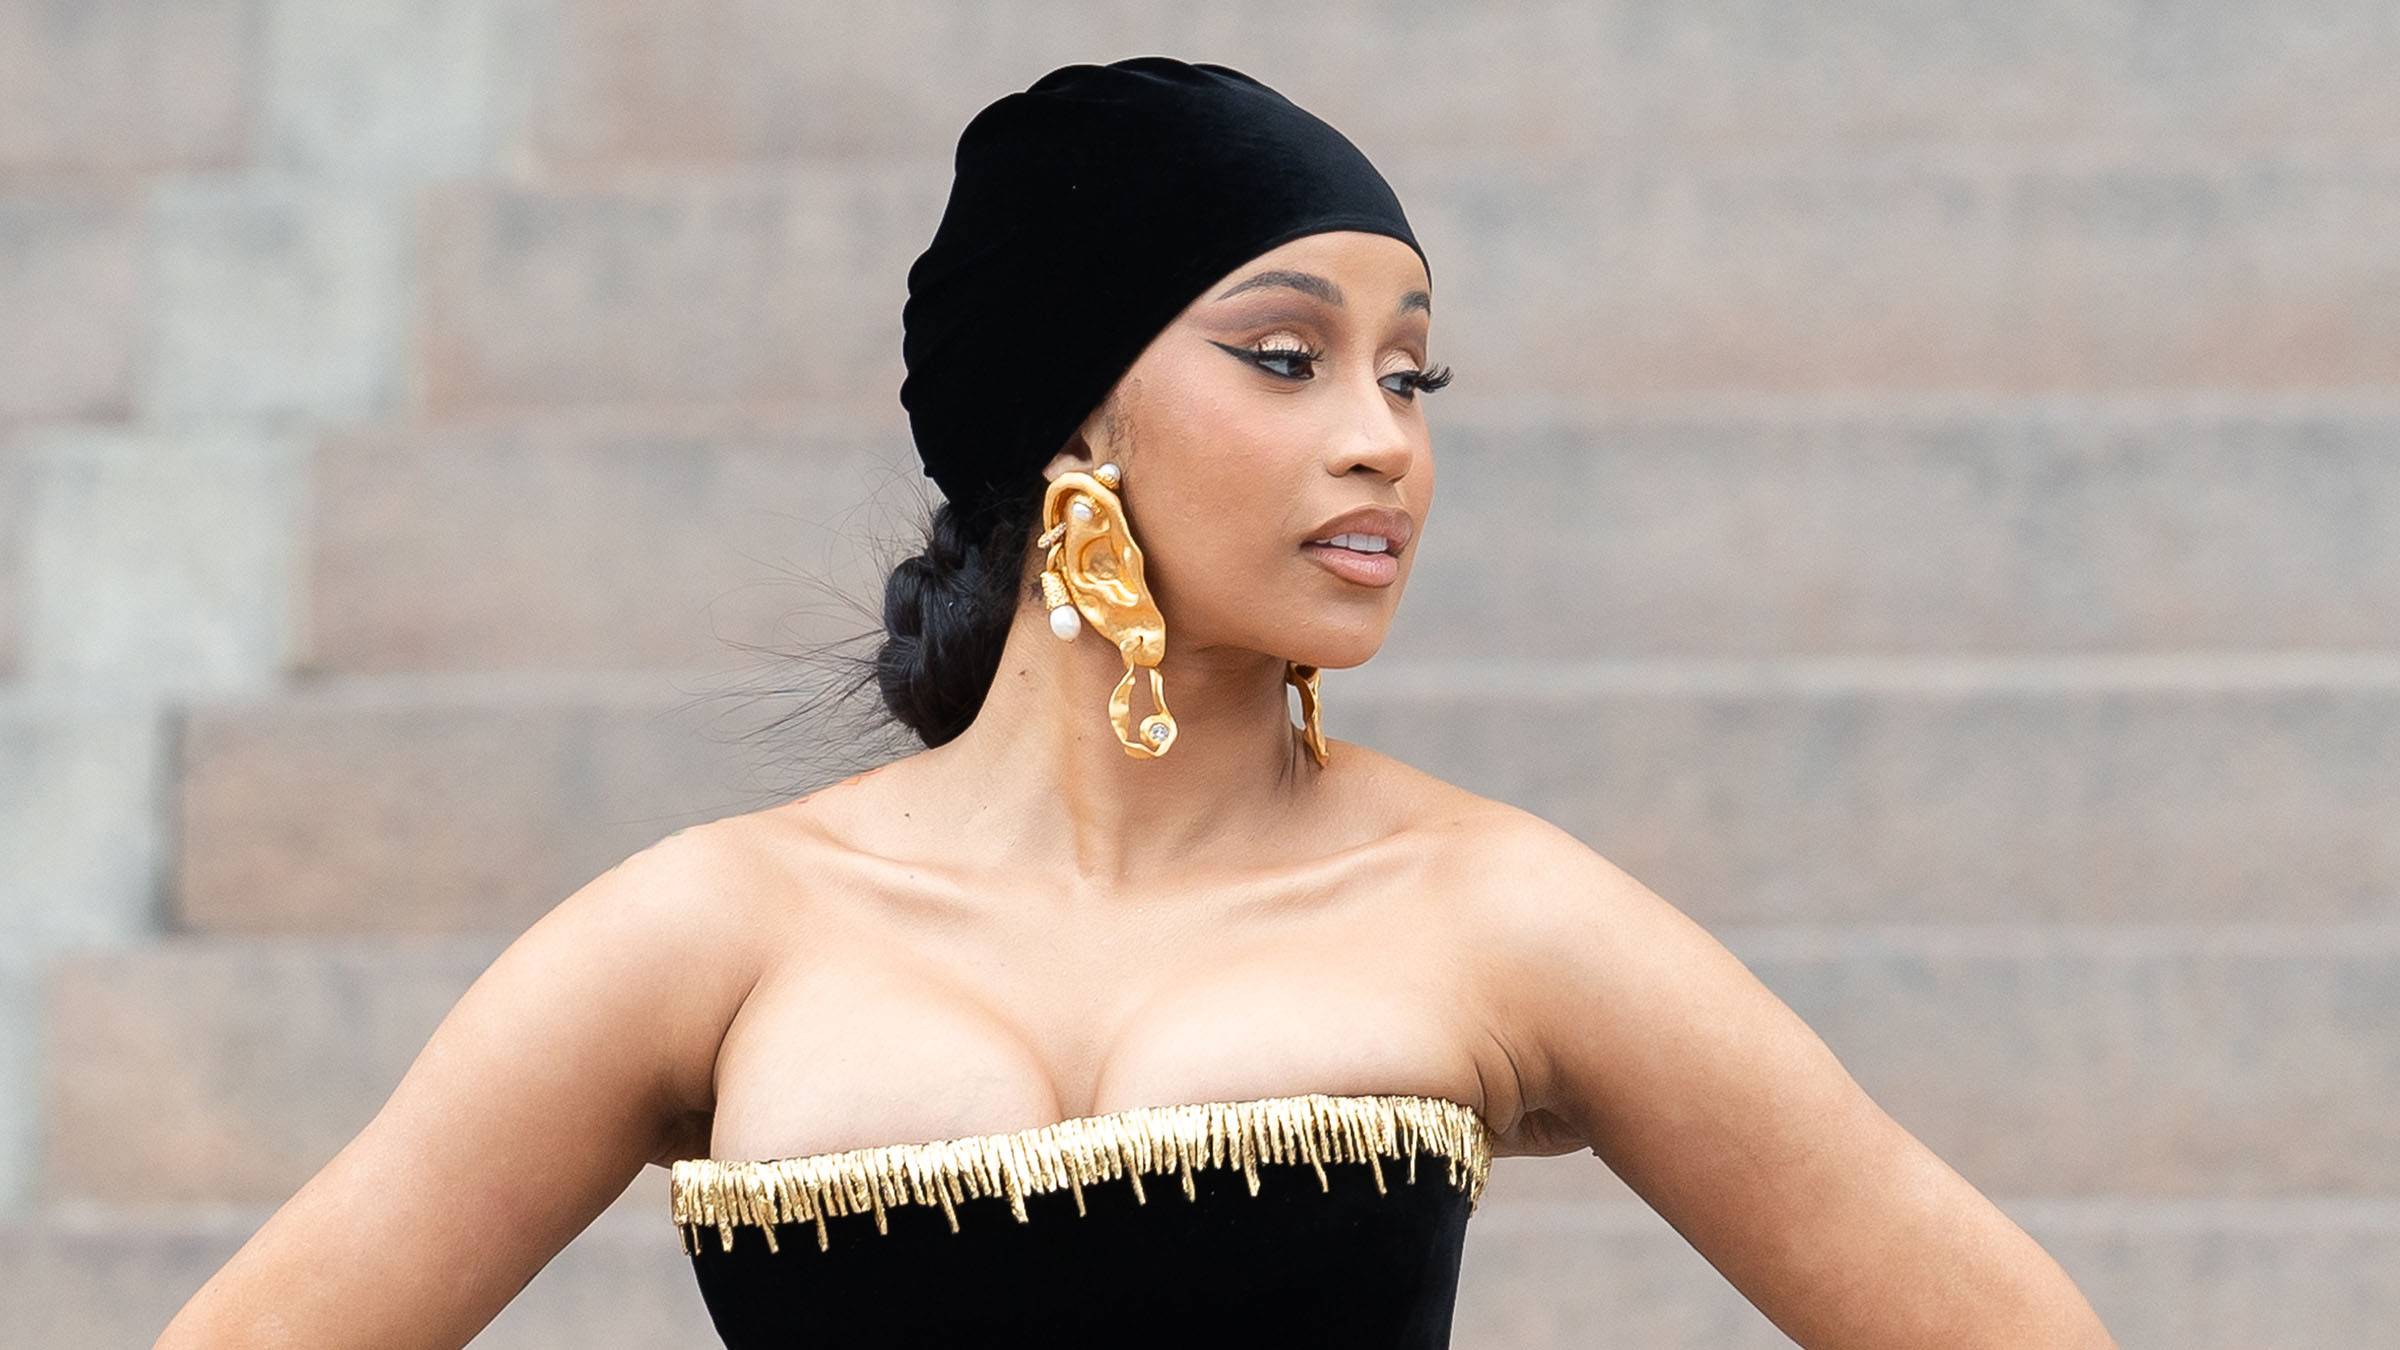 Cardi B Turns Heads At Paris Fashion Show Amid Beef With Offset